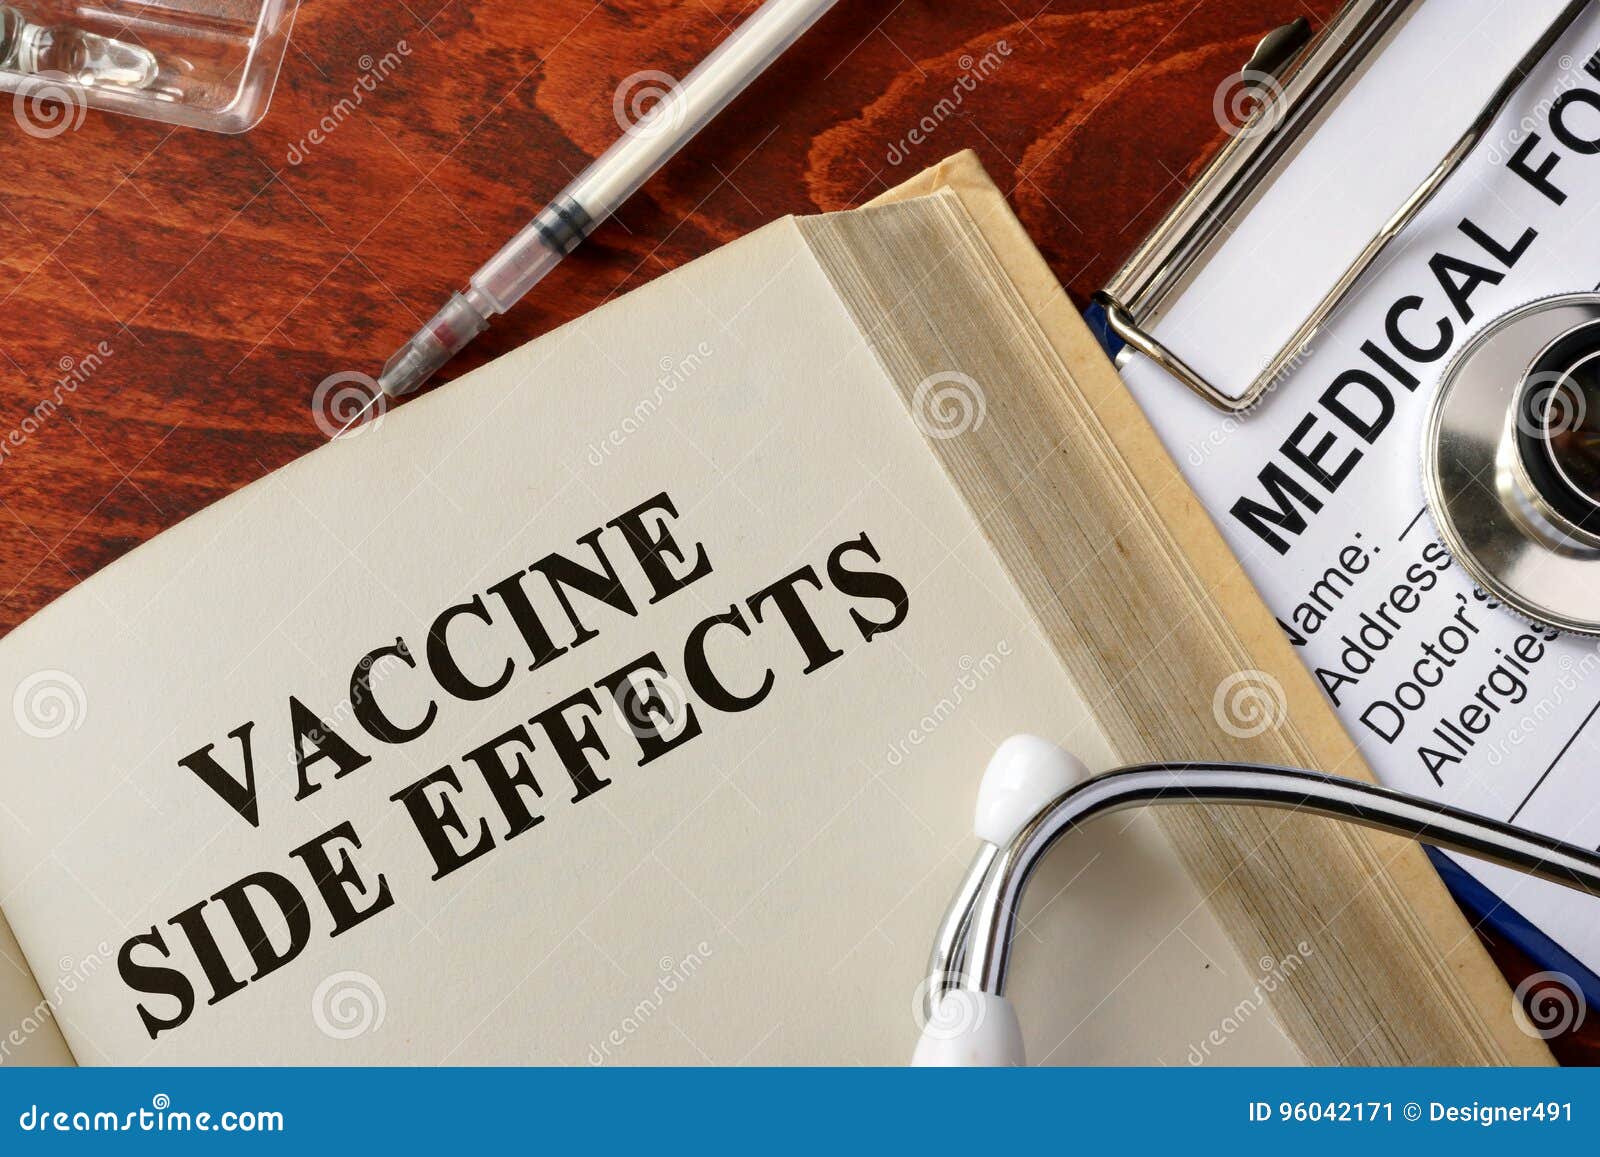 title vaccine side effects.